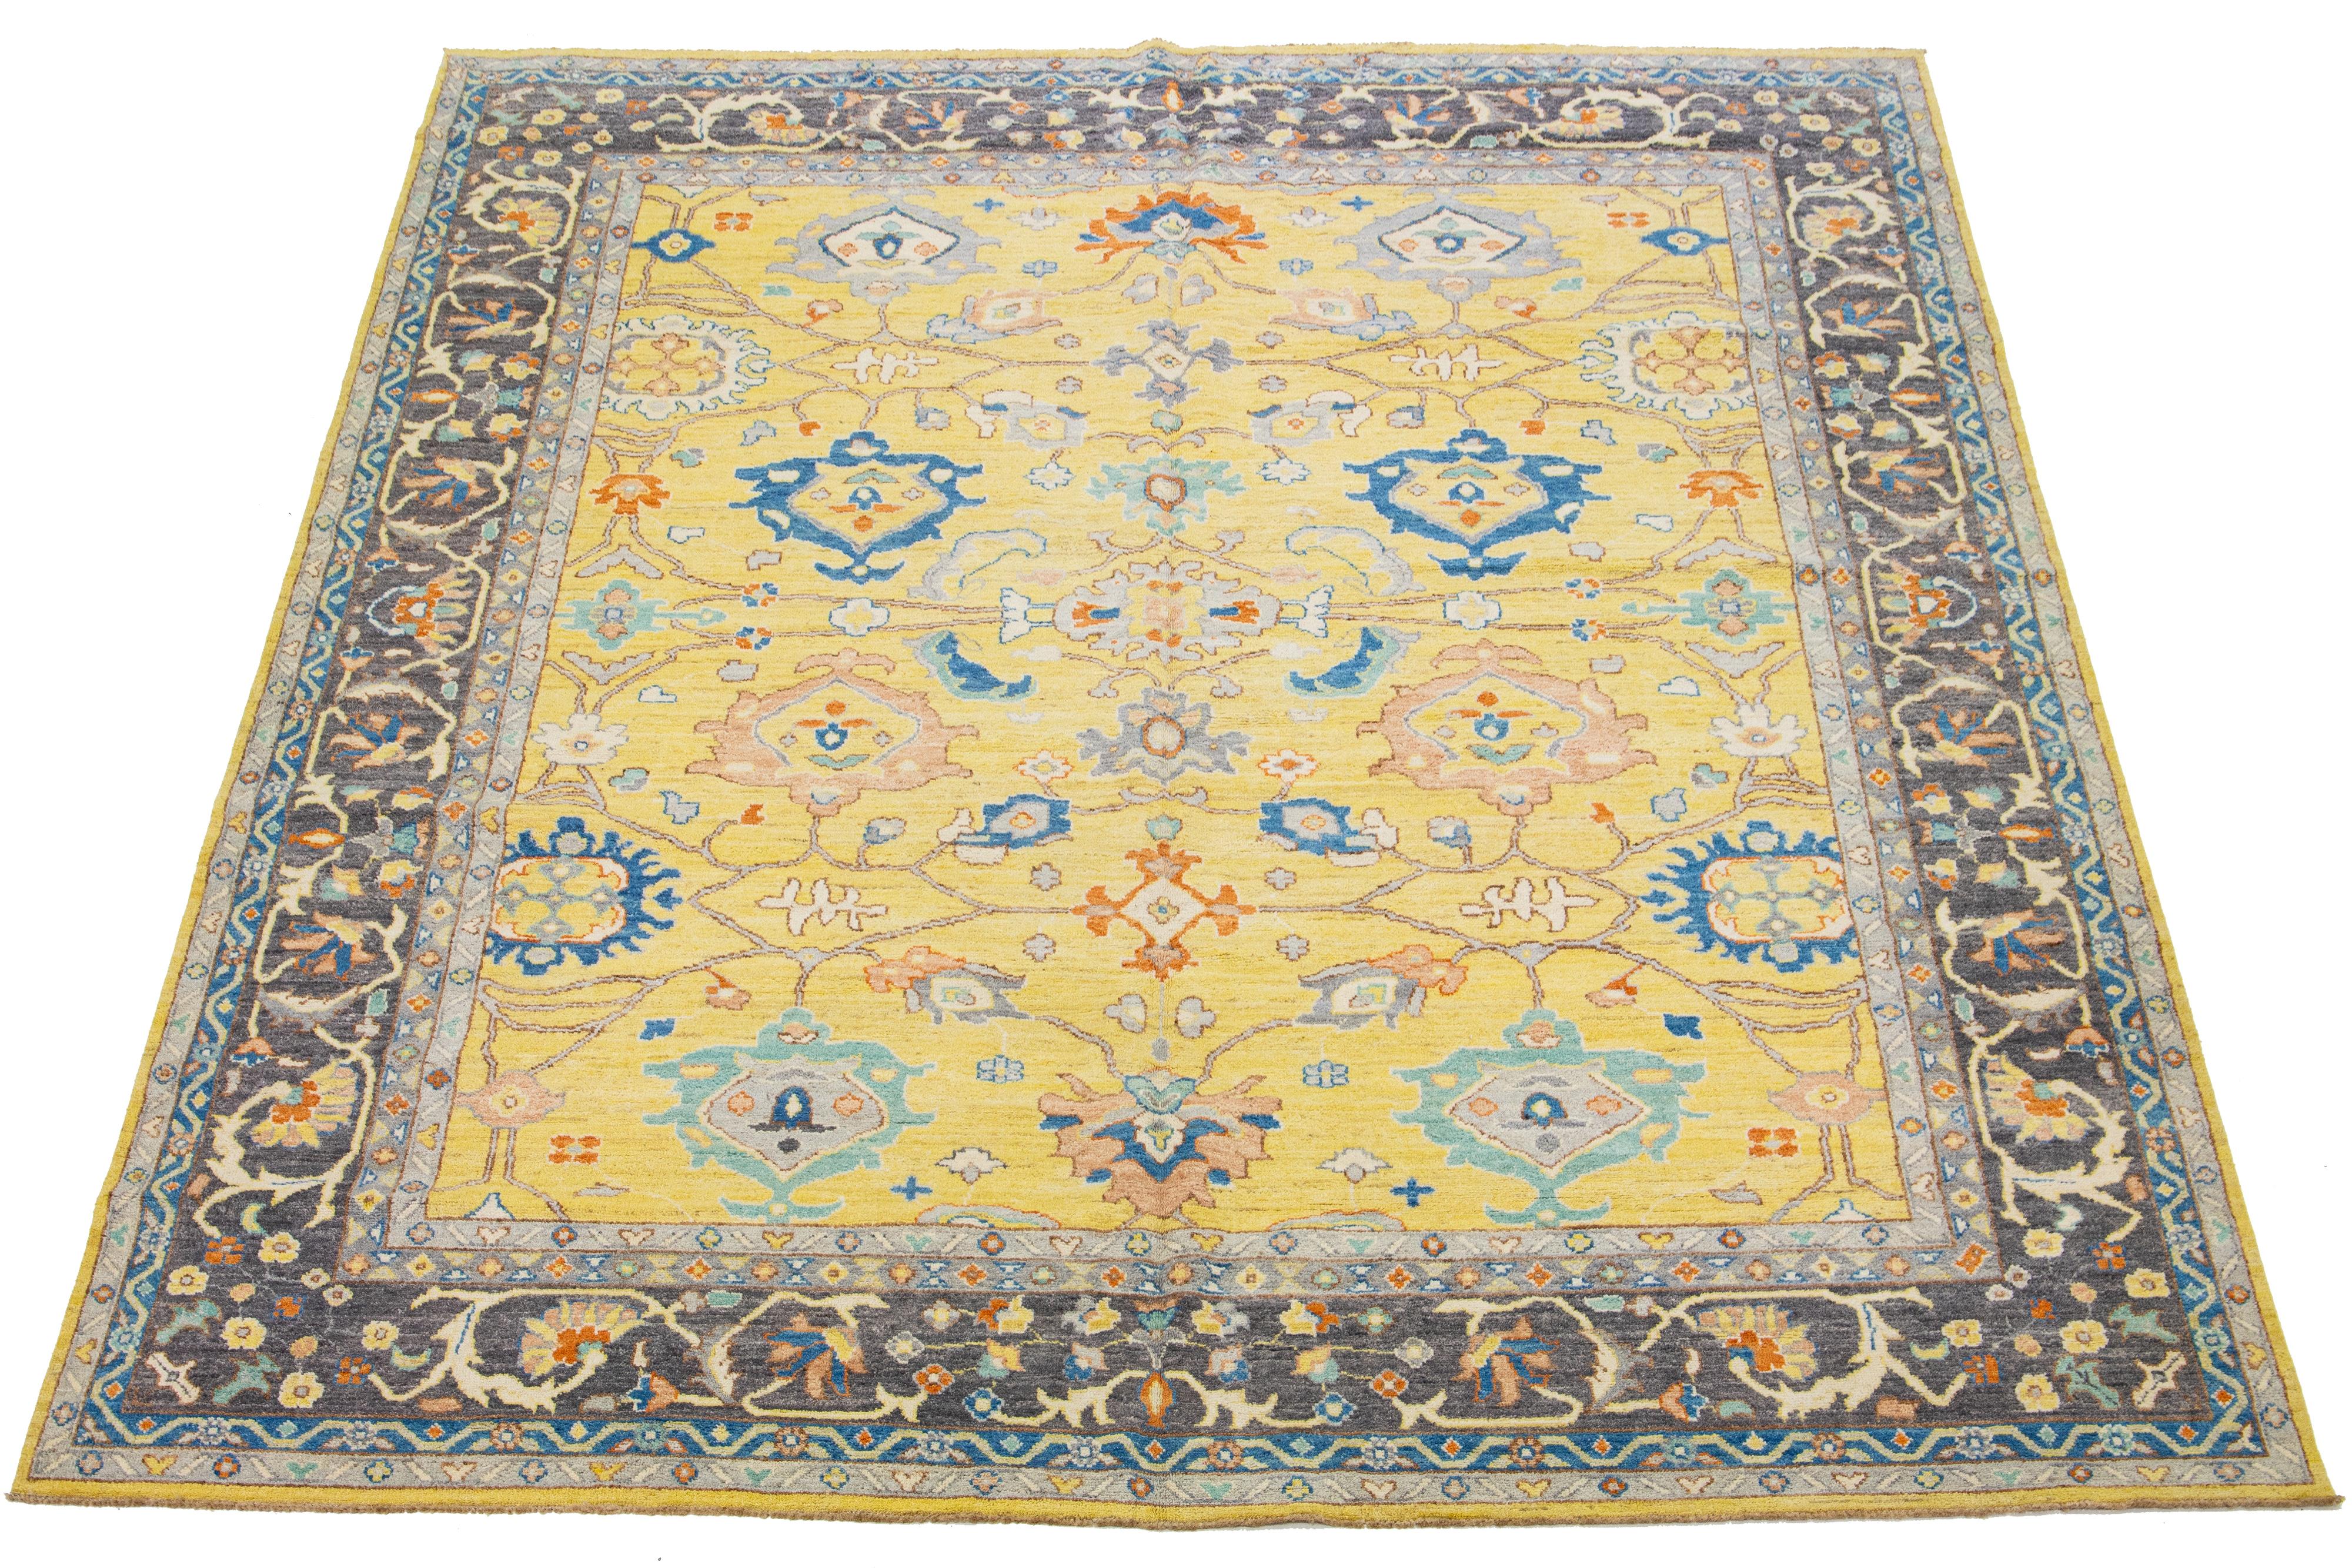 This wool rug displays a modern aesthetic with its Oushak-style design. It showcases a hand-knotted yellow field that is embellished with diverse, vibrant floral patterns that extend across the entirety of the rug.

This rug measures 12'5